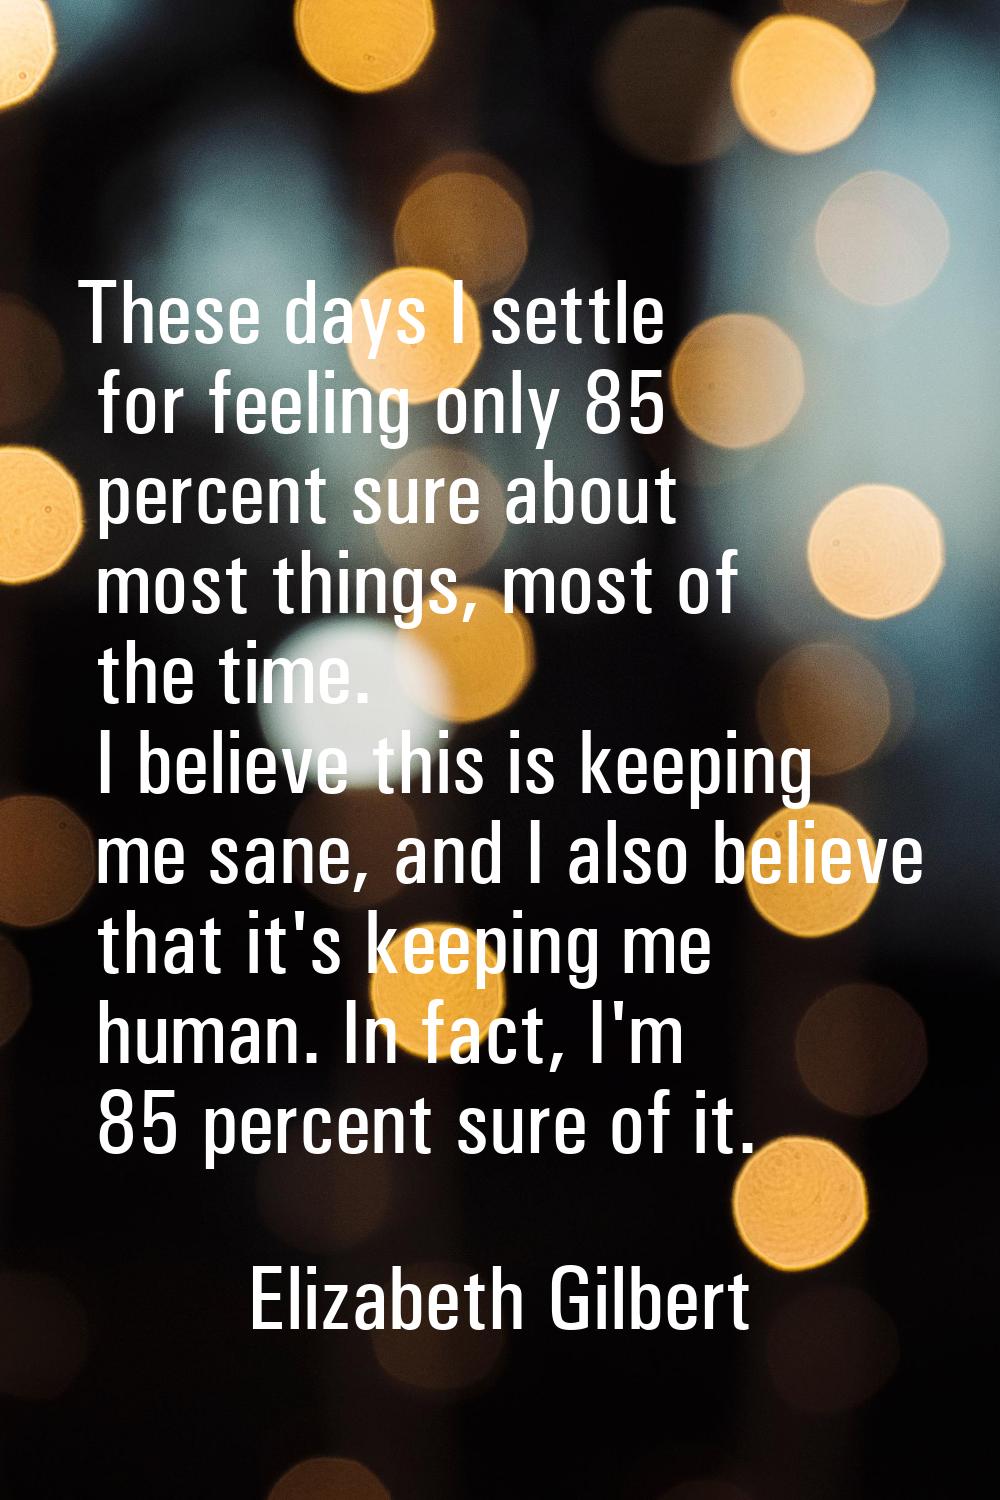 These days I settle for feeling only 85 percent sure about most things, most of the time. I believe